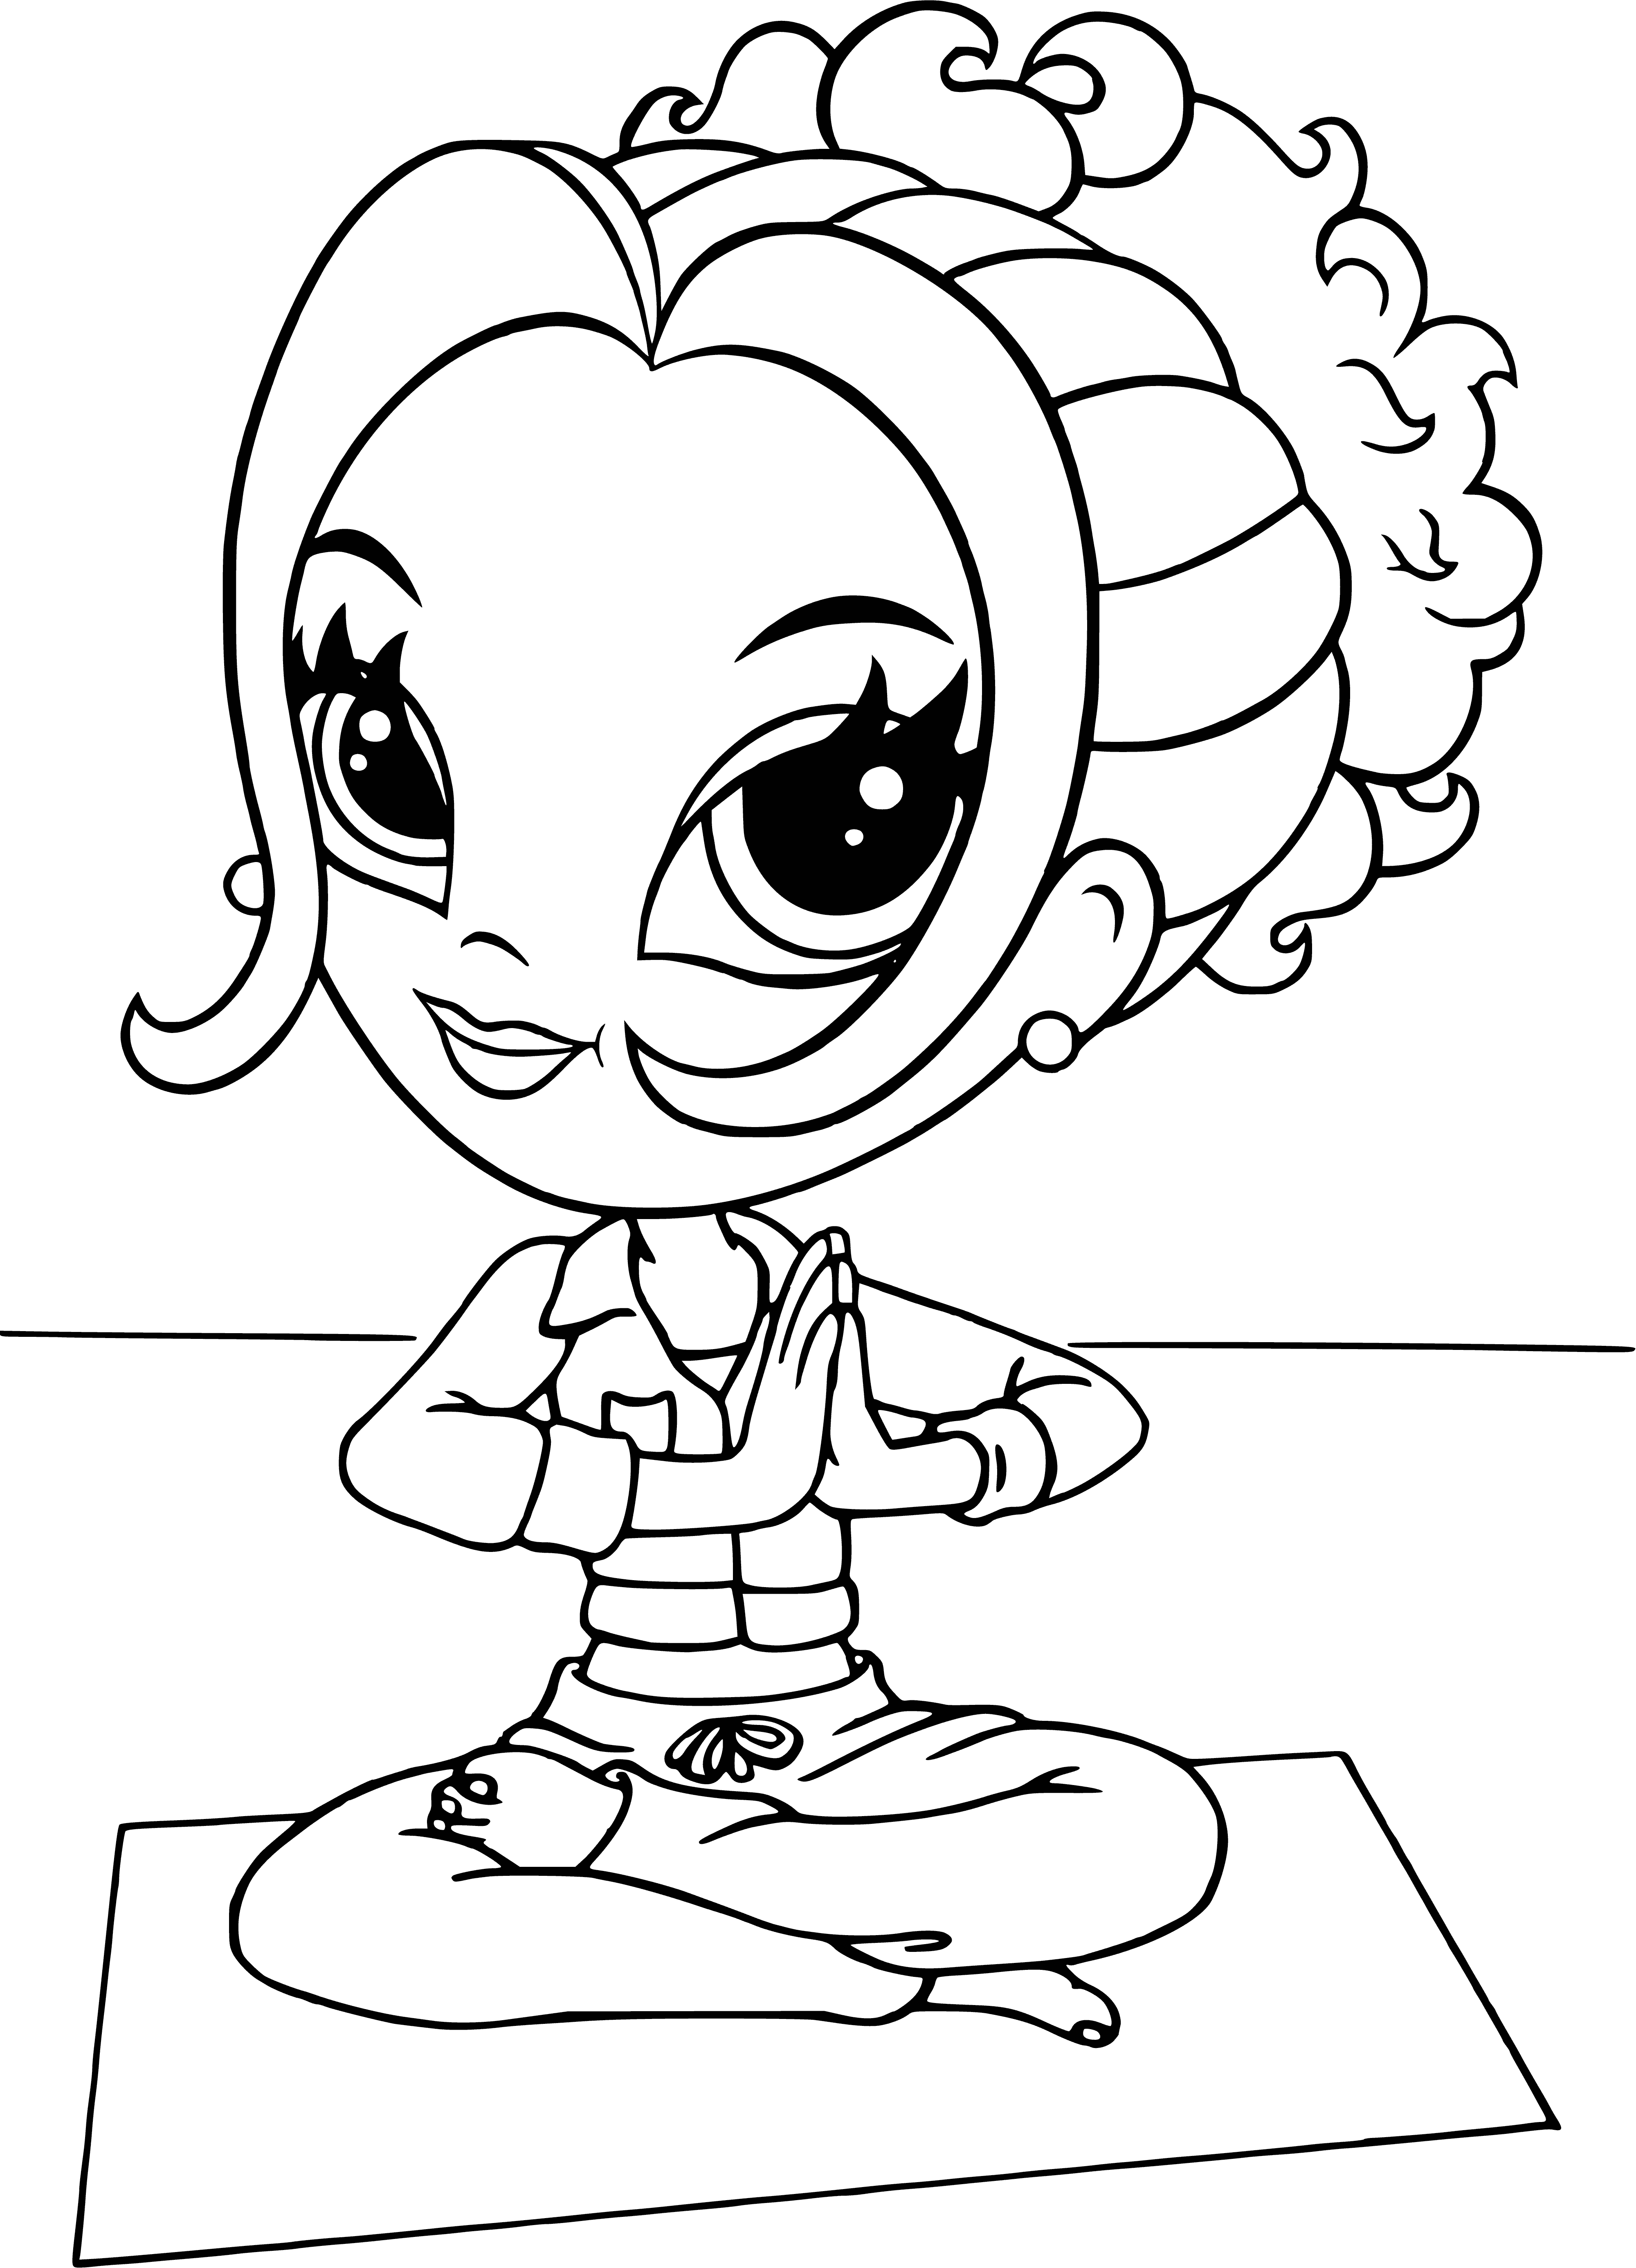 coloring page: Girl having time of her life. Dressed for a glam event & looking fabulous. Eyes sparkling & hair styled, ready to take on the world!